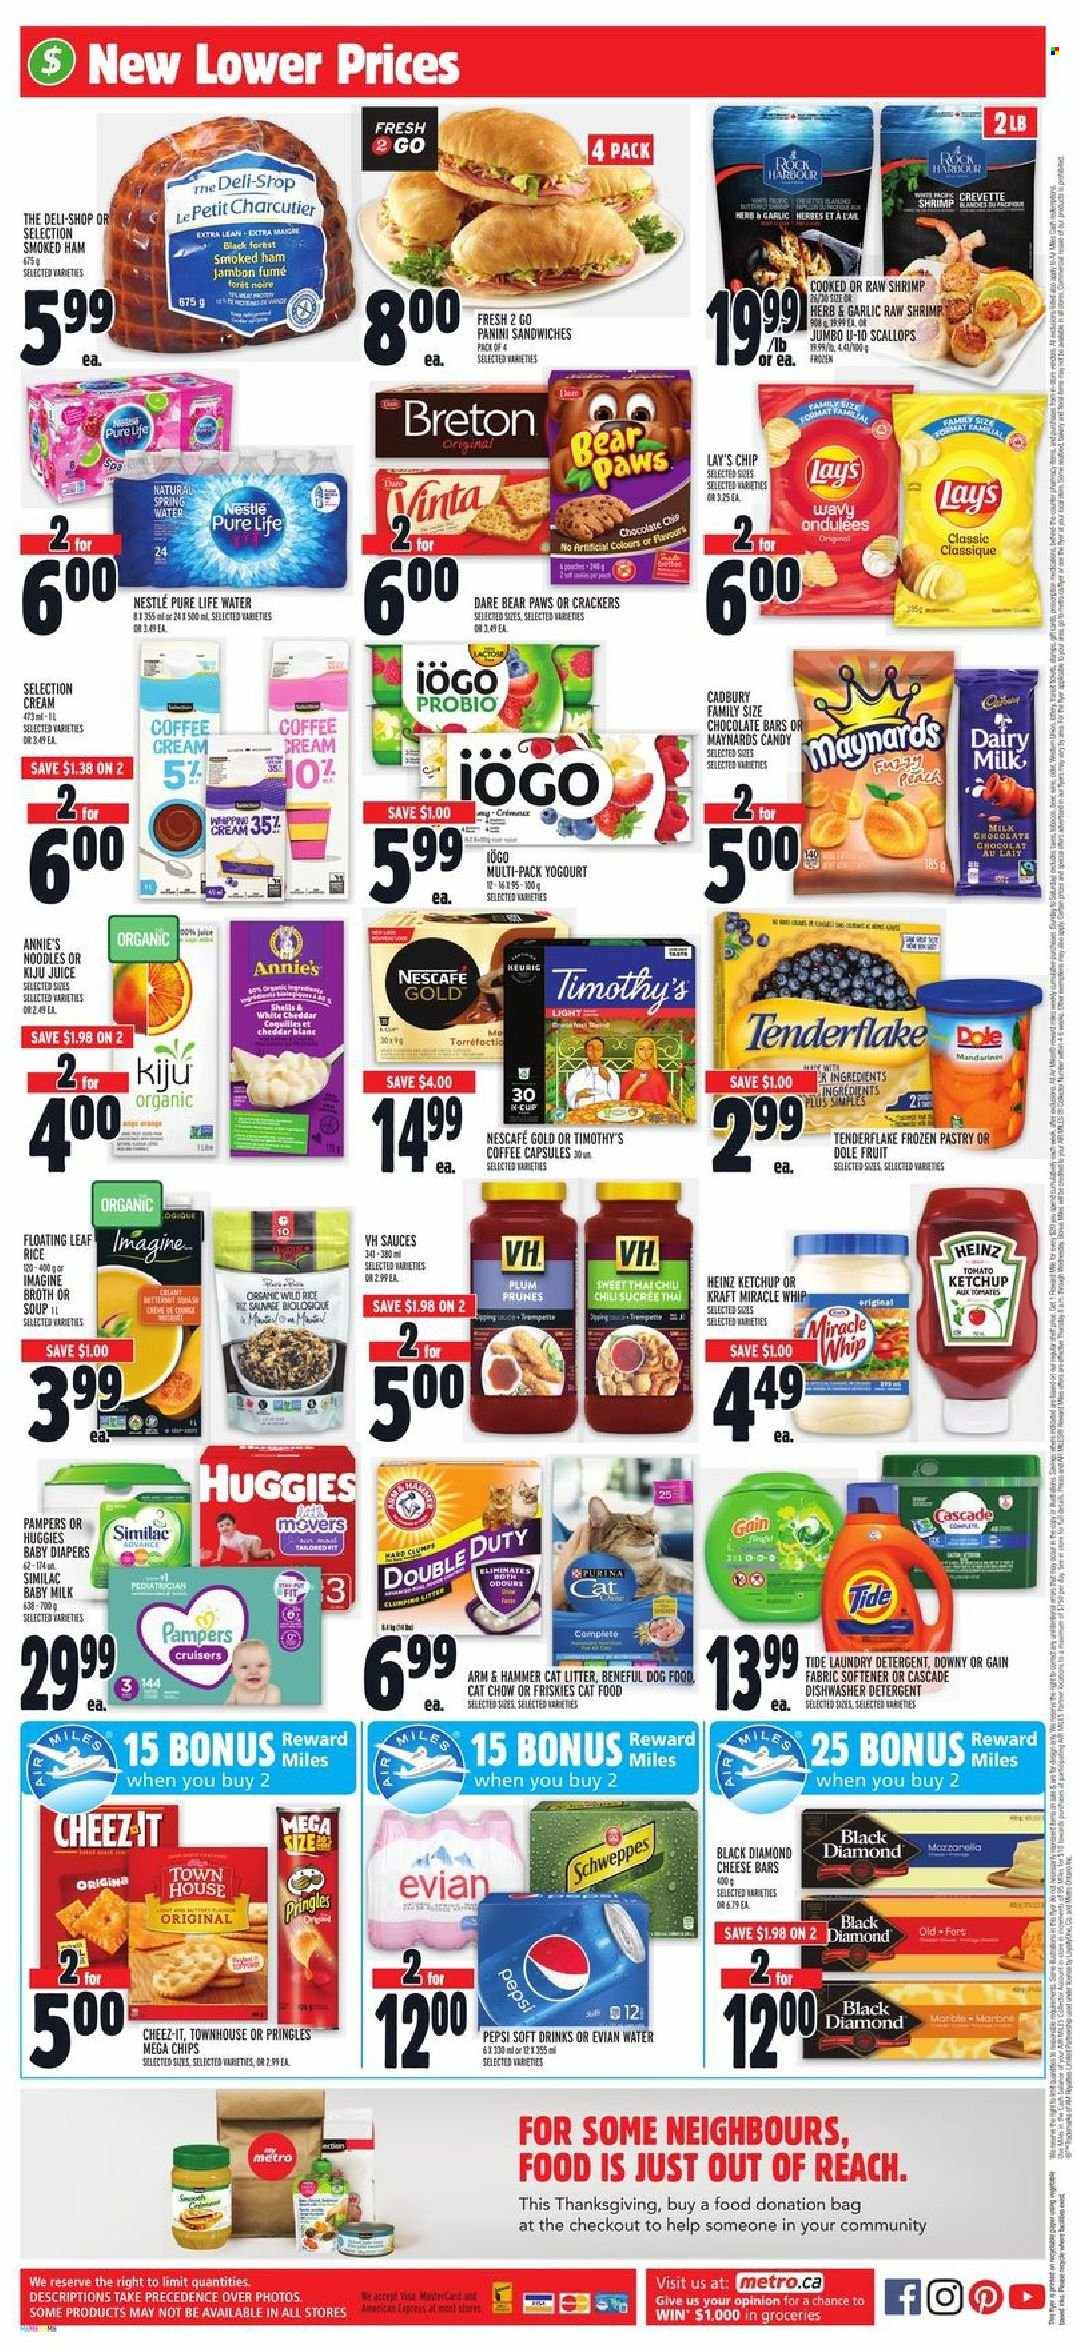 thumbnail - Metro Flyer - September 23, 2021 - September 29, 2021 - Sales products - panini, Dole, scallops, shrimps, sandwich, soup, Annie's, Kraft®, ham, smoked ham, cheese, Miracle Whip, crackers, Cadbury, Dairy Milk, chocolate bar, Pringles, Lay’s, Cheez-It, ARM & HAMMER, broth, Heinz, rice, prunes, dried fruit, Schweppes, Pepsi, juice, soft drink, spring water, Pure Life Water, Evian, coffee capsules, Similac, nappies, Gain, Tide, fabric softener, laundry detergent, Cascade, cat litter, Paws, animal food, cat food, dog food, Purina, Friskies, Nestlé, detergent, Huggies, ketchup, Pampers, Nescafé. Page 11.